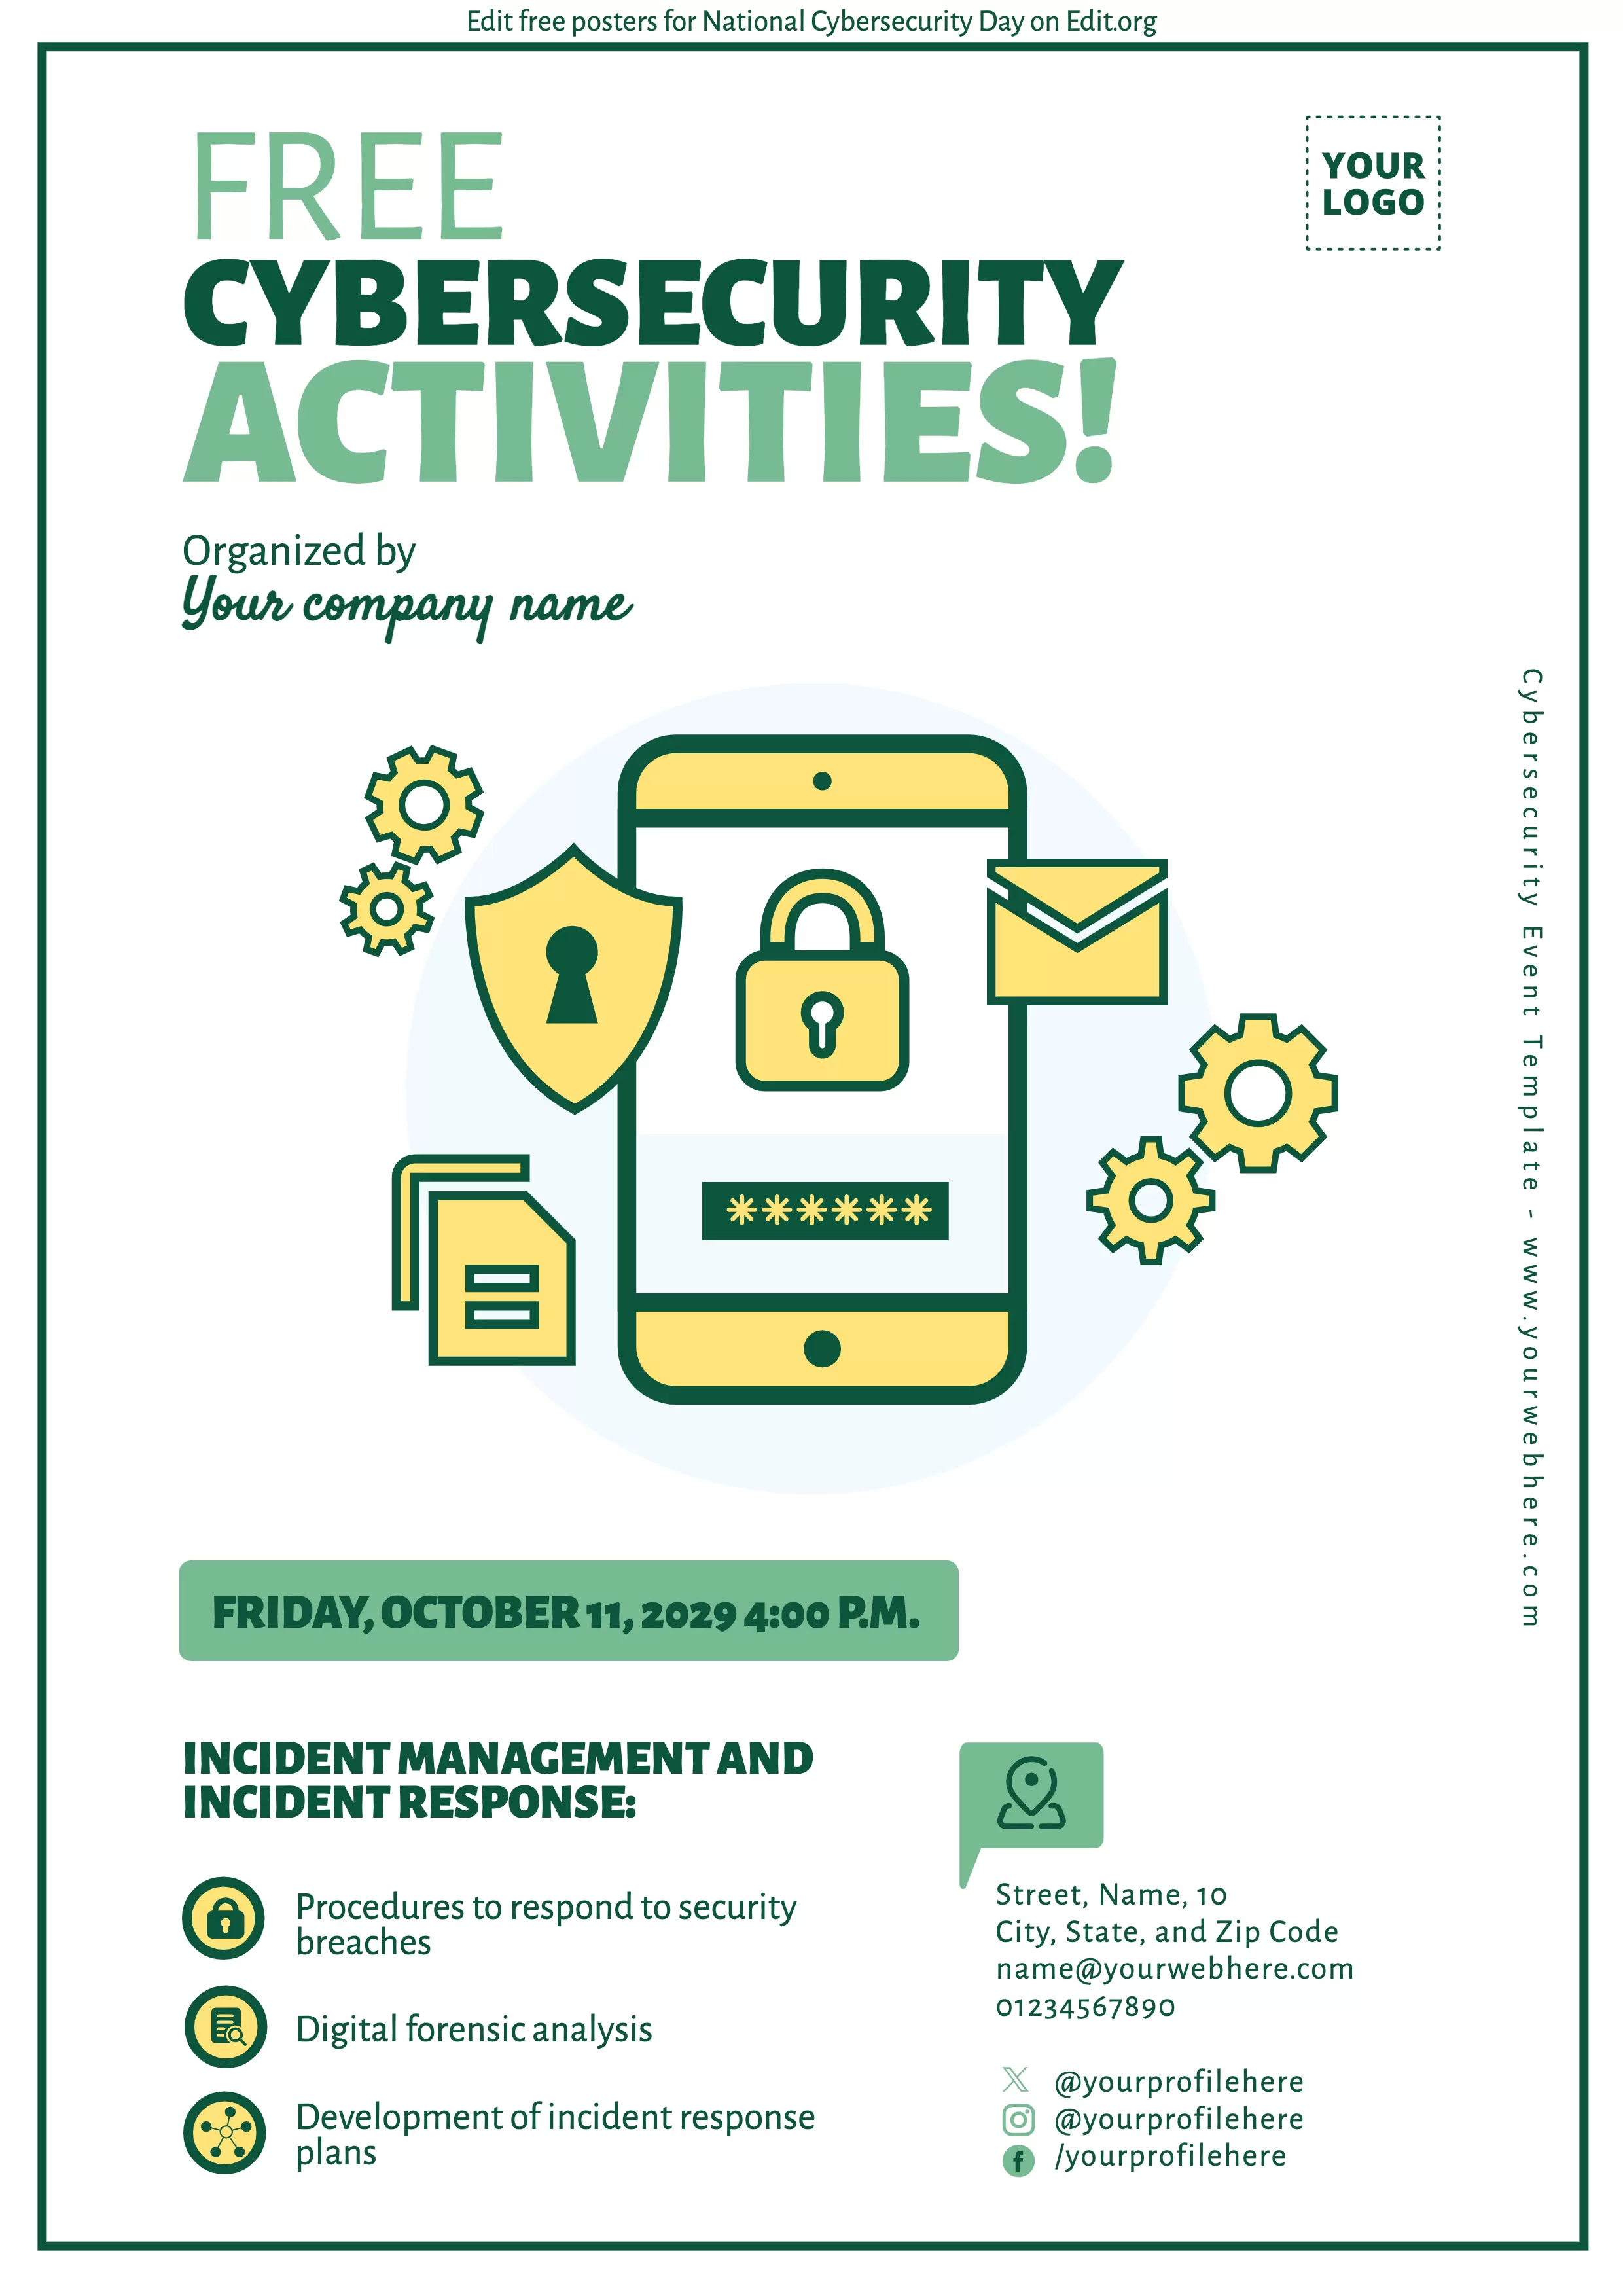 Free poster about Cyber Security Awareness and activities